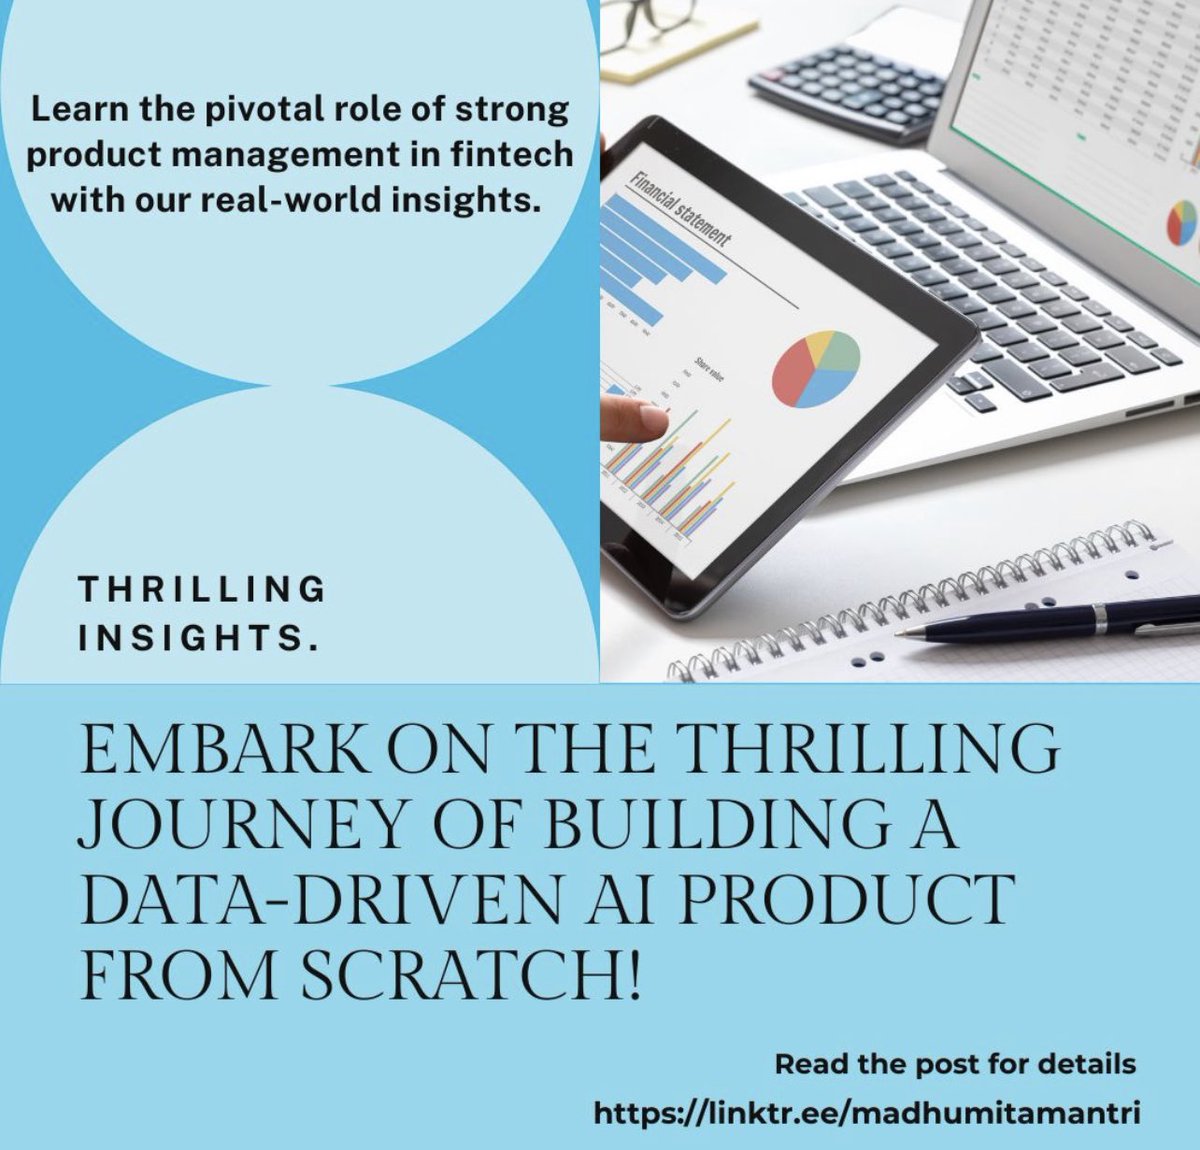 Data and AI product from scratch is a thrilling journey. Sharing insights, highlighting the critical role of a robust product management foundation in Fintech. 
Use-Case: Credit Risk Assessment

Read the comments section. #Fintech #DataProduct #AIProduct #ProductManagement